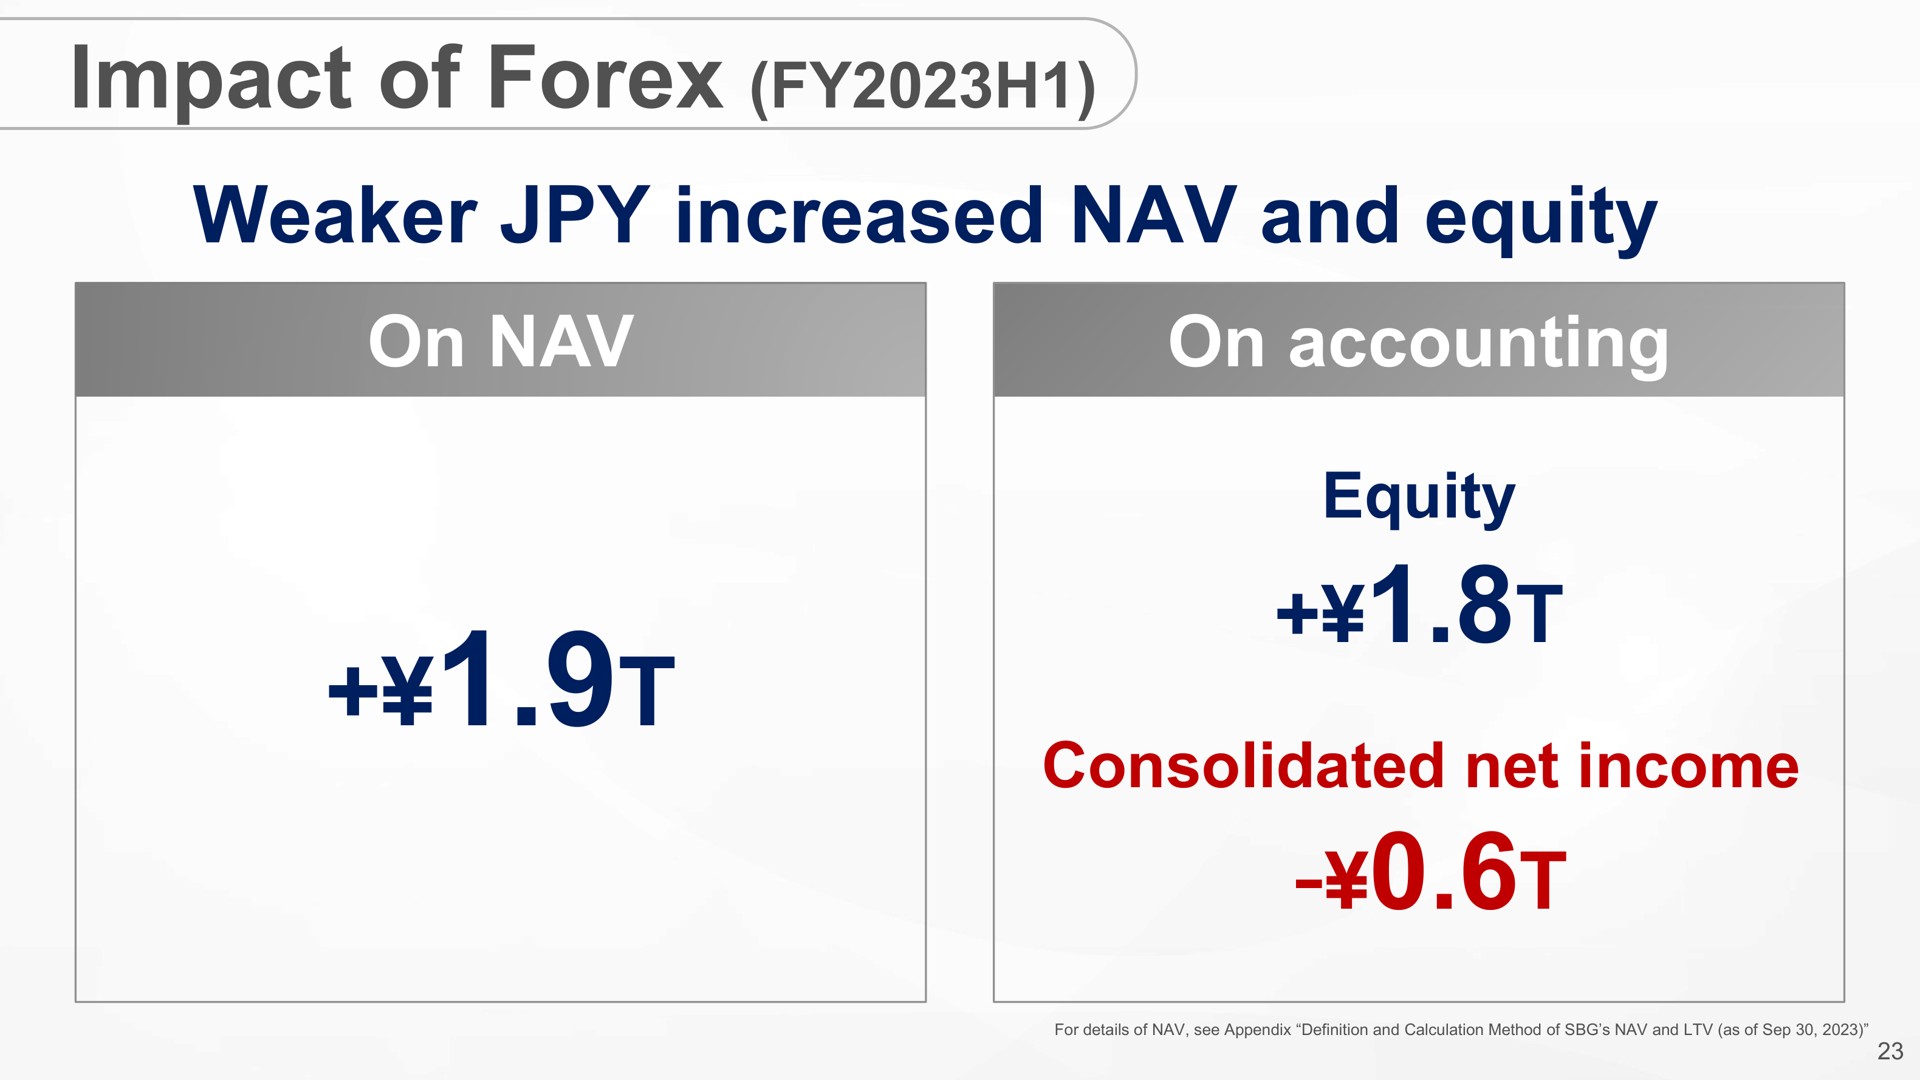 impact of increased and equity on on accounting equity consolidated net income | SoftBank